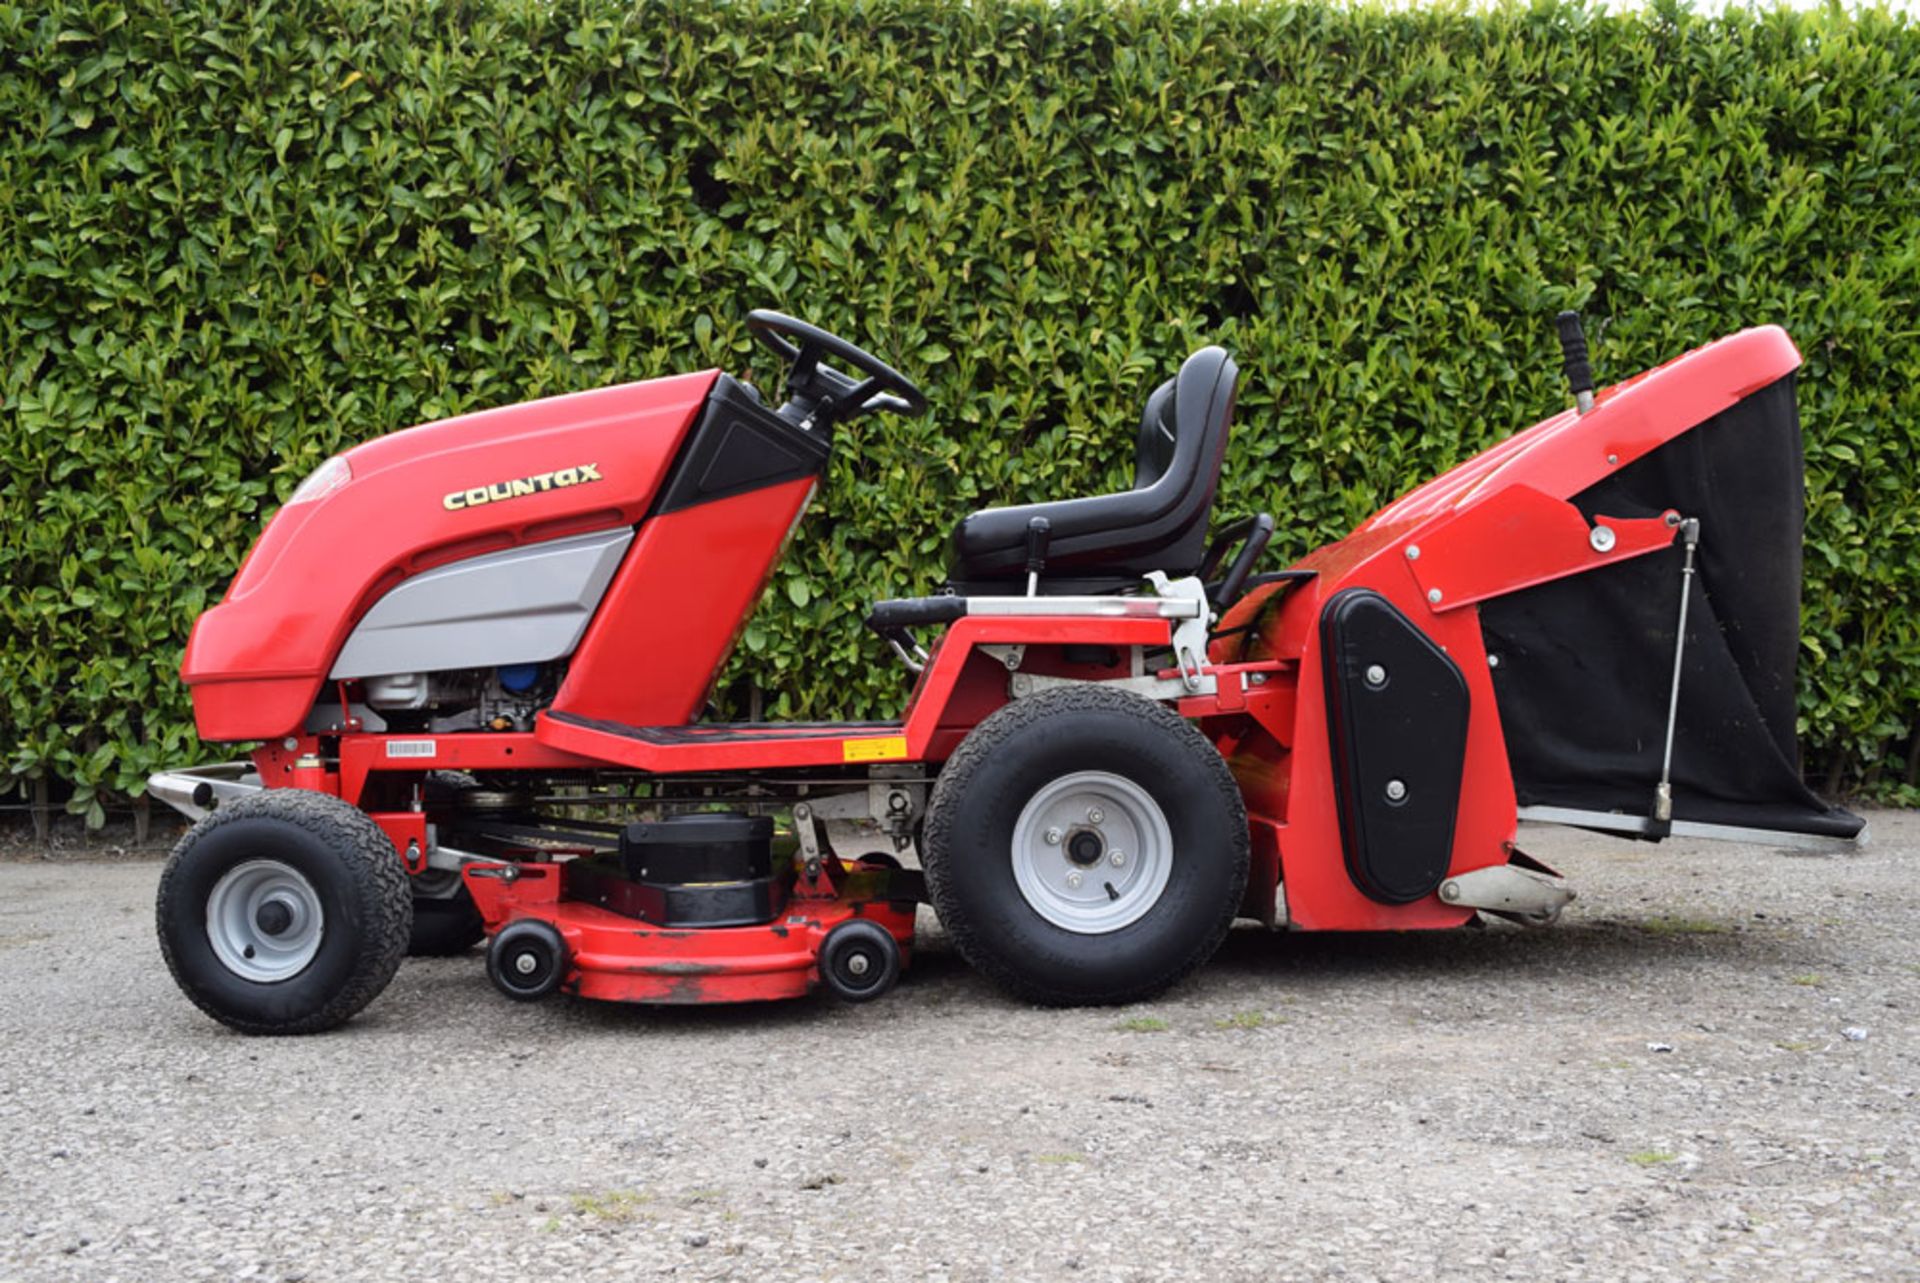 Countax C800H 44" Rear Discharge Garden Tractor With PGC - Image 5 of 7